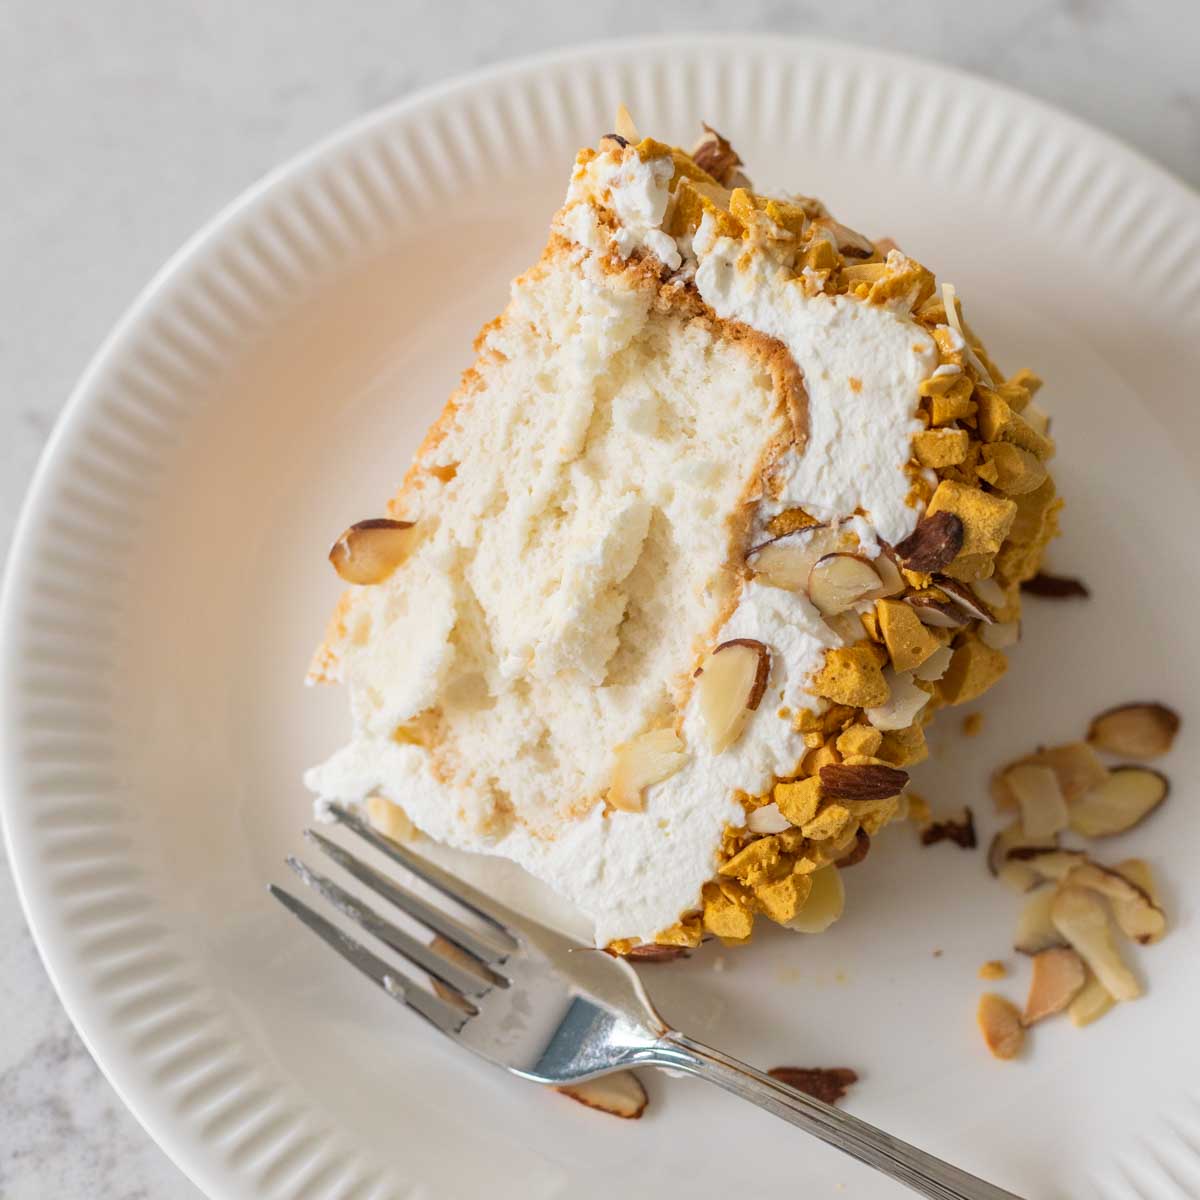 The slice of almond crunch cake is on a plate.